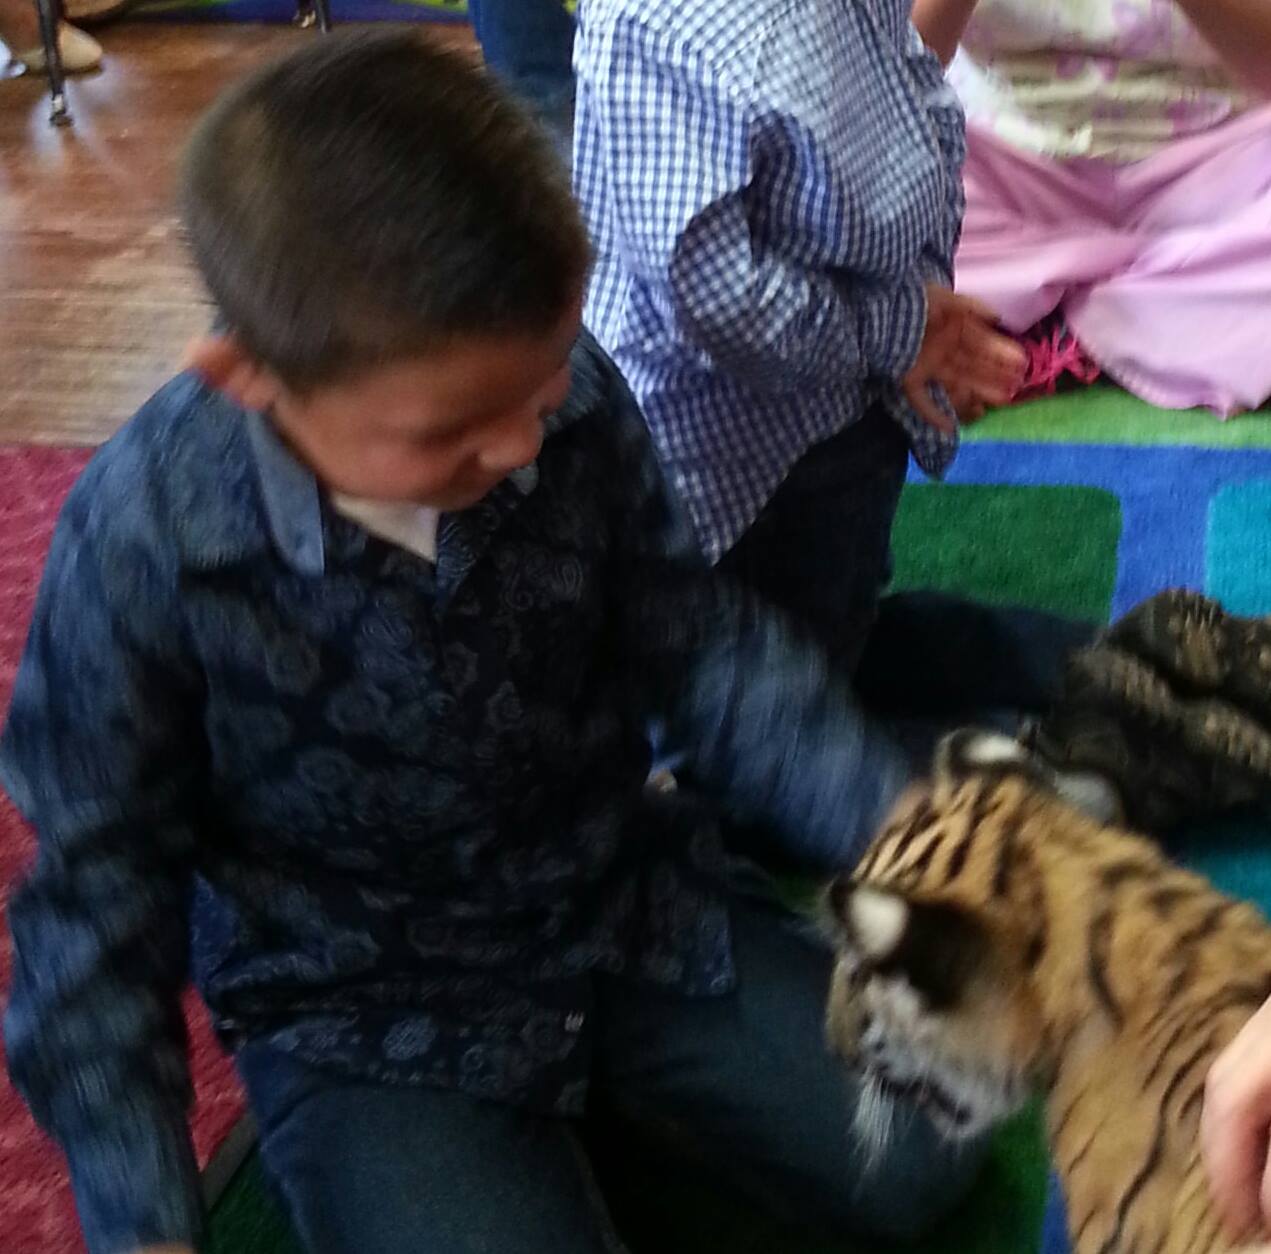 Child petting a tiger